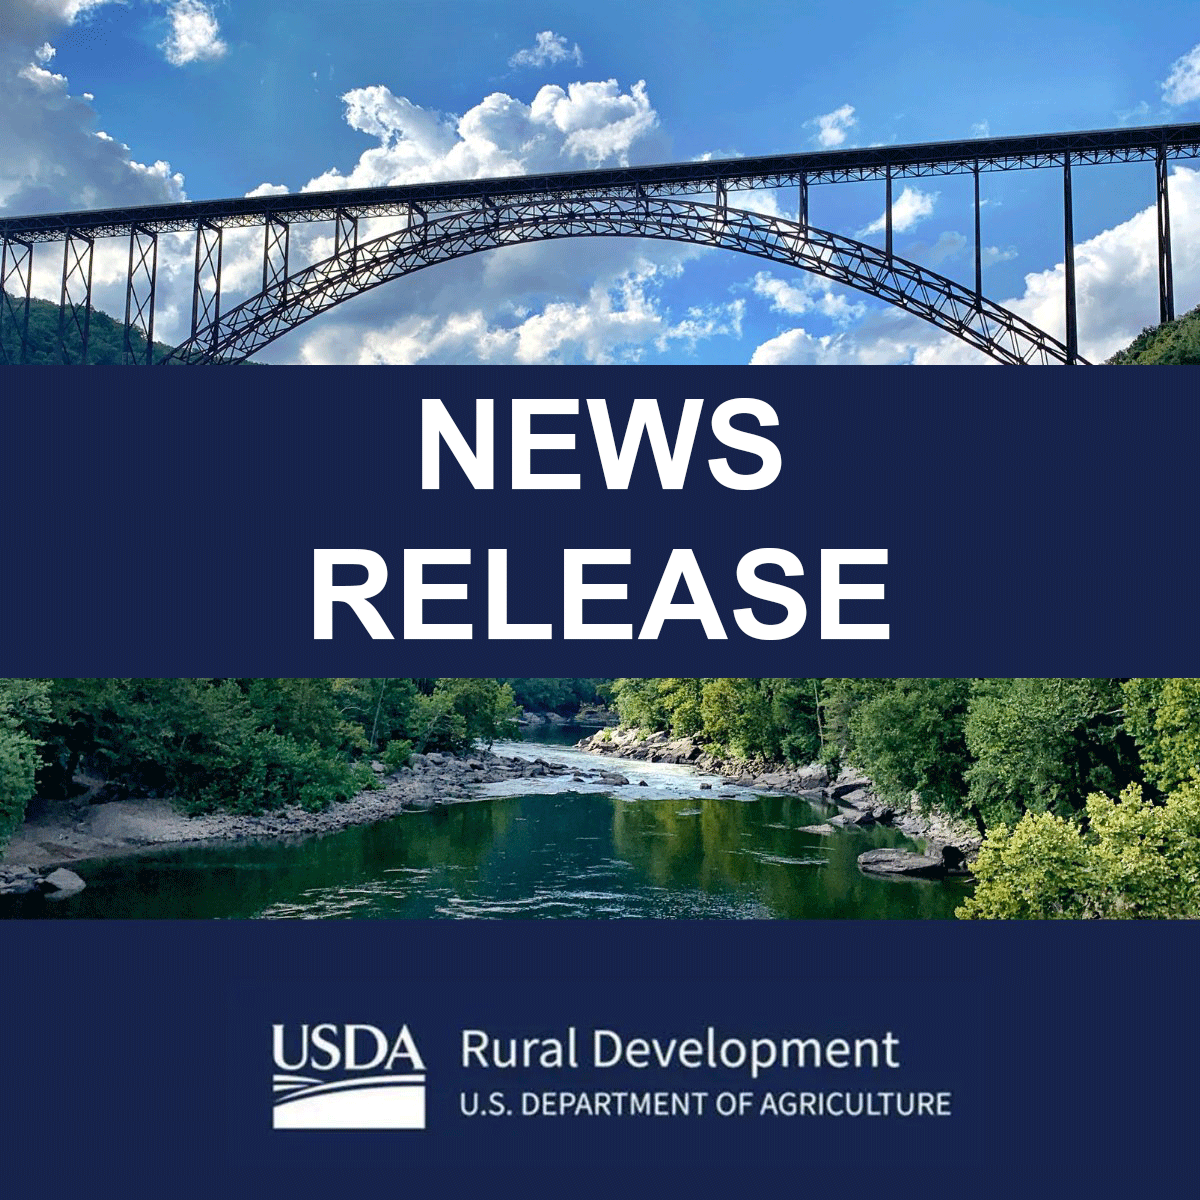 Happy Infrastructure Week! Our State Director @RyanThornWV just announced that Rural Development is investing $840k to improve wastewater infrastructure in Mineral County. This project will benefit nearly 1,200 West Virginians. Read the full announcement: content.govdelivery.com/accounts/USDAR…